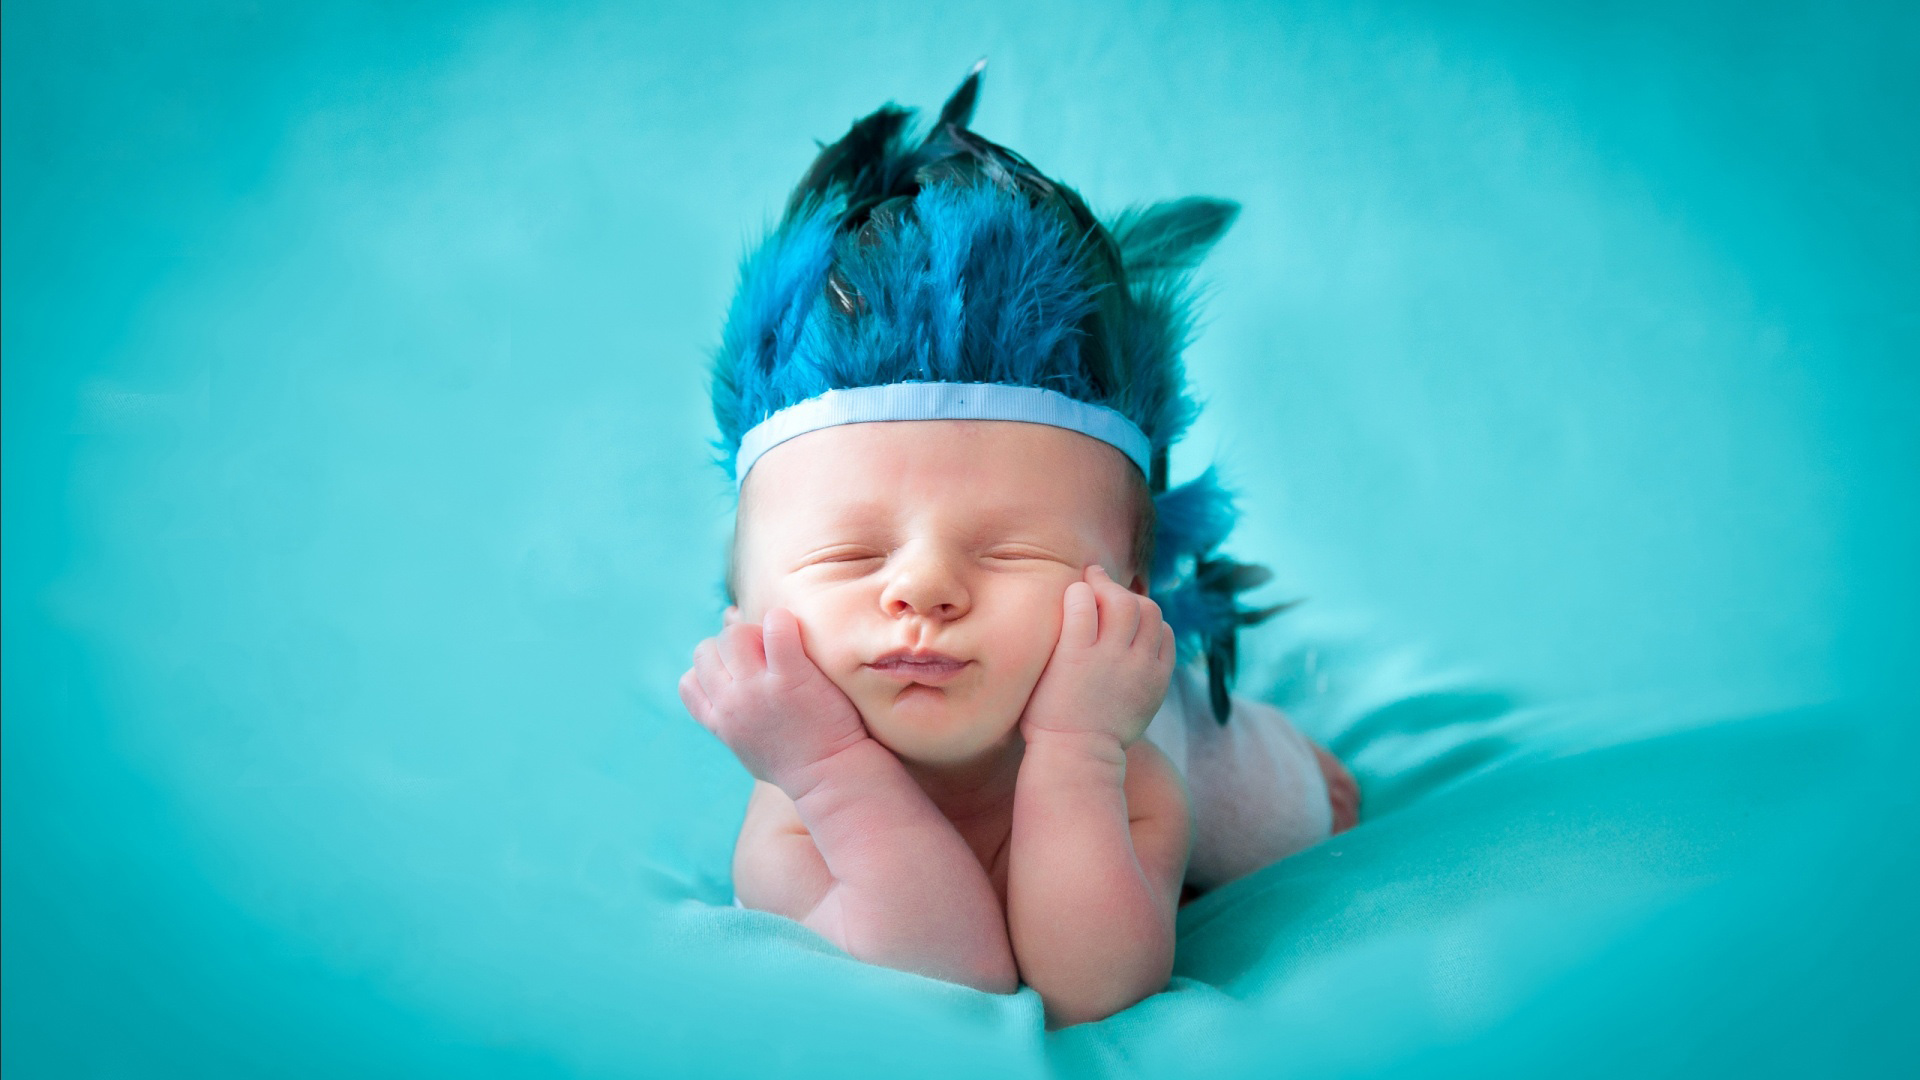 Cute Charmy Baby With Feather On Head 2K Cute